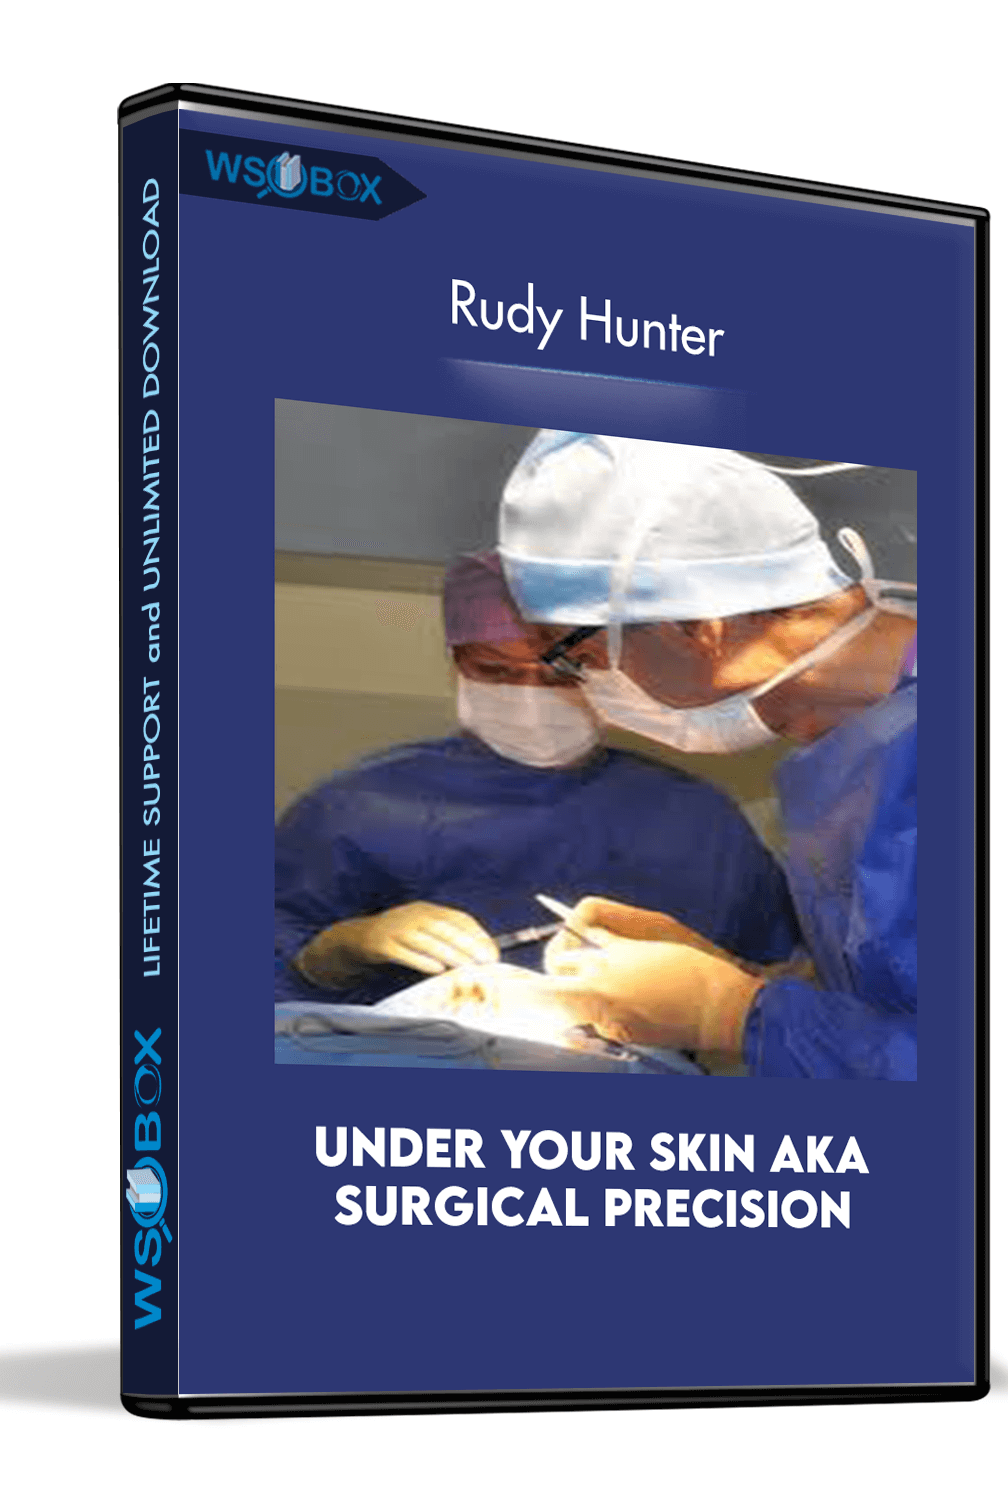 Under Your Skin AKA Surgical Precision – Rudy Hunter